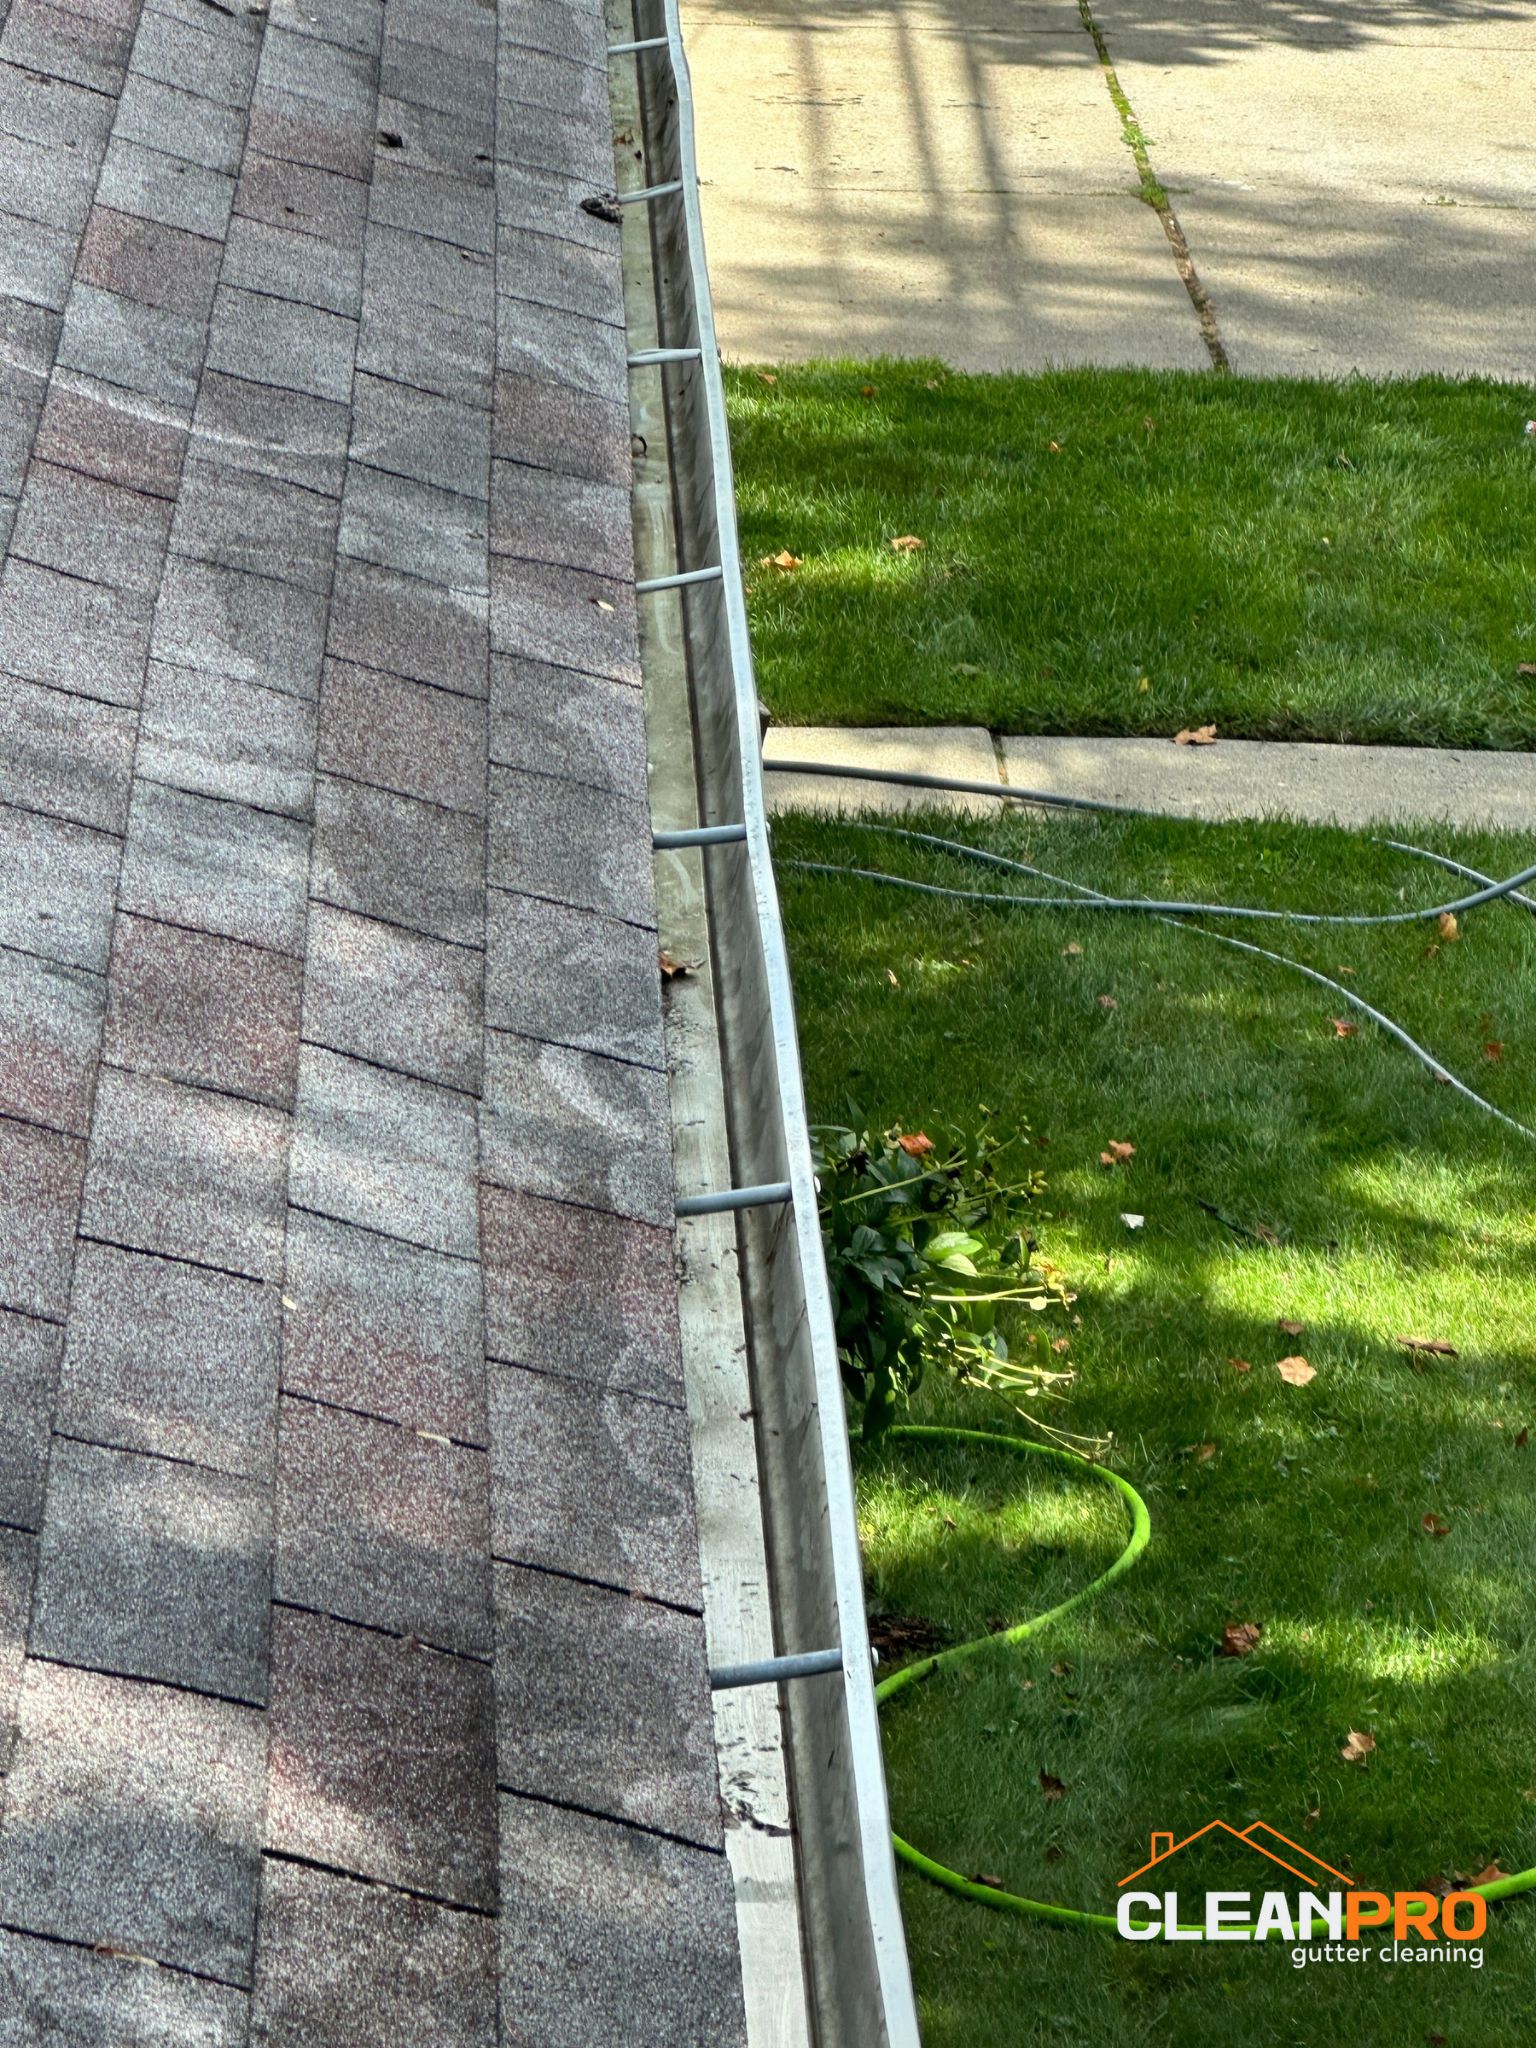 Professional Des Moines Gutter Cleaners